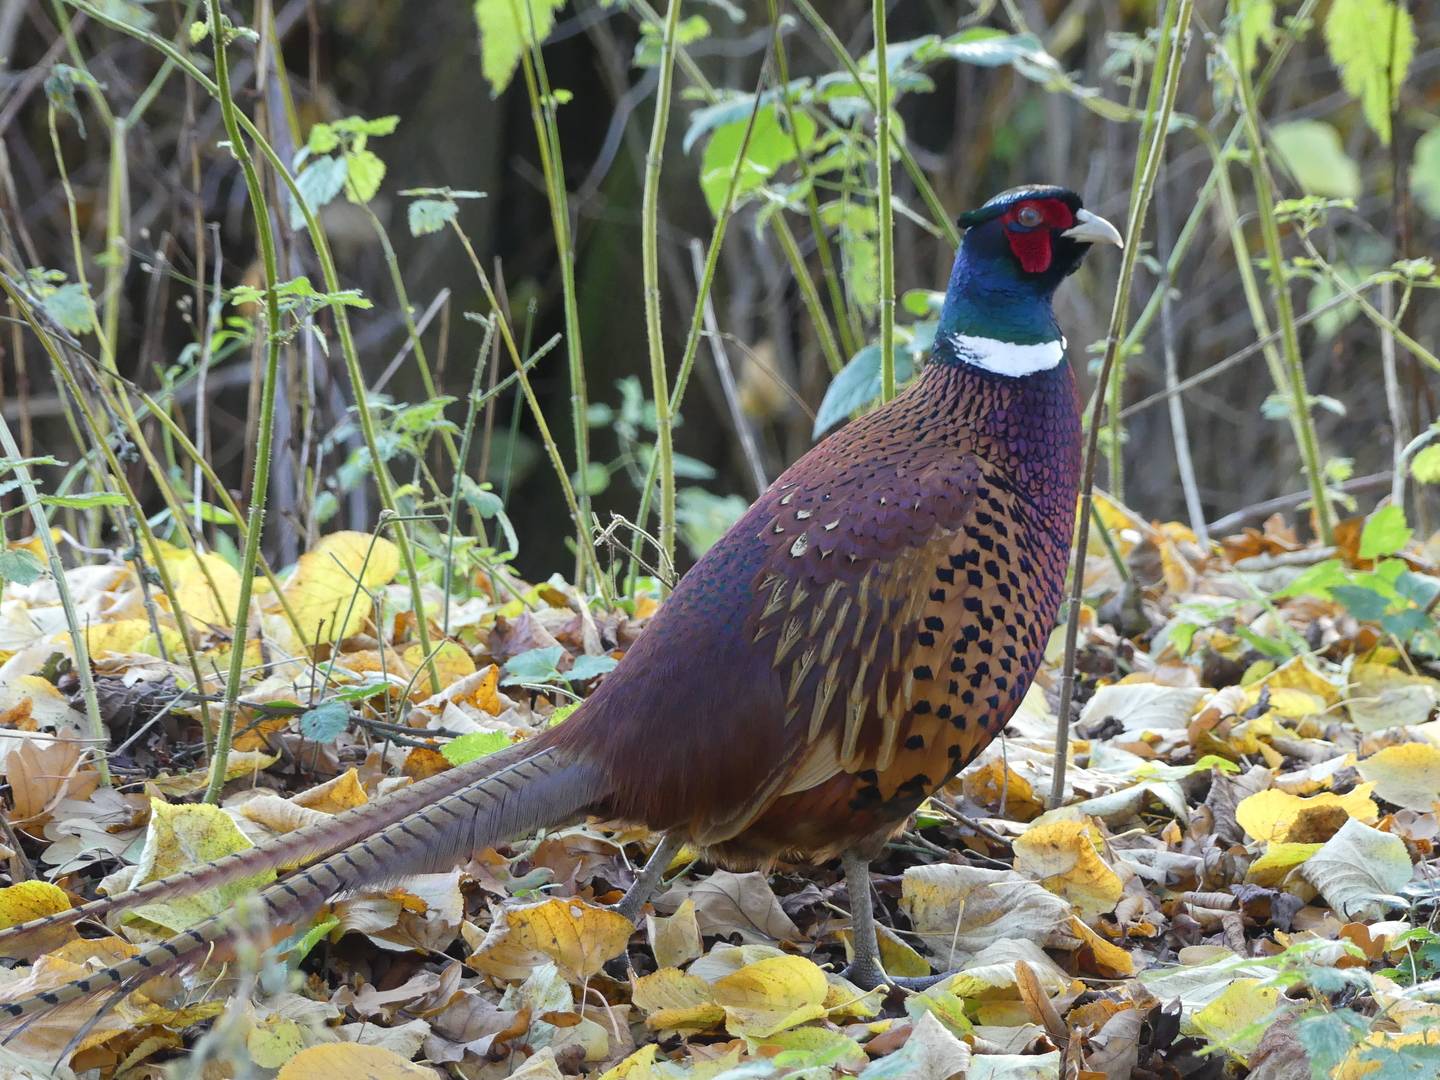 Common Pheasant, Permission granted by photographer (tour guest)